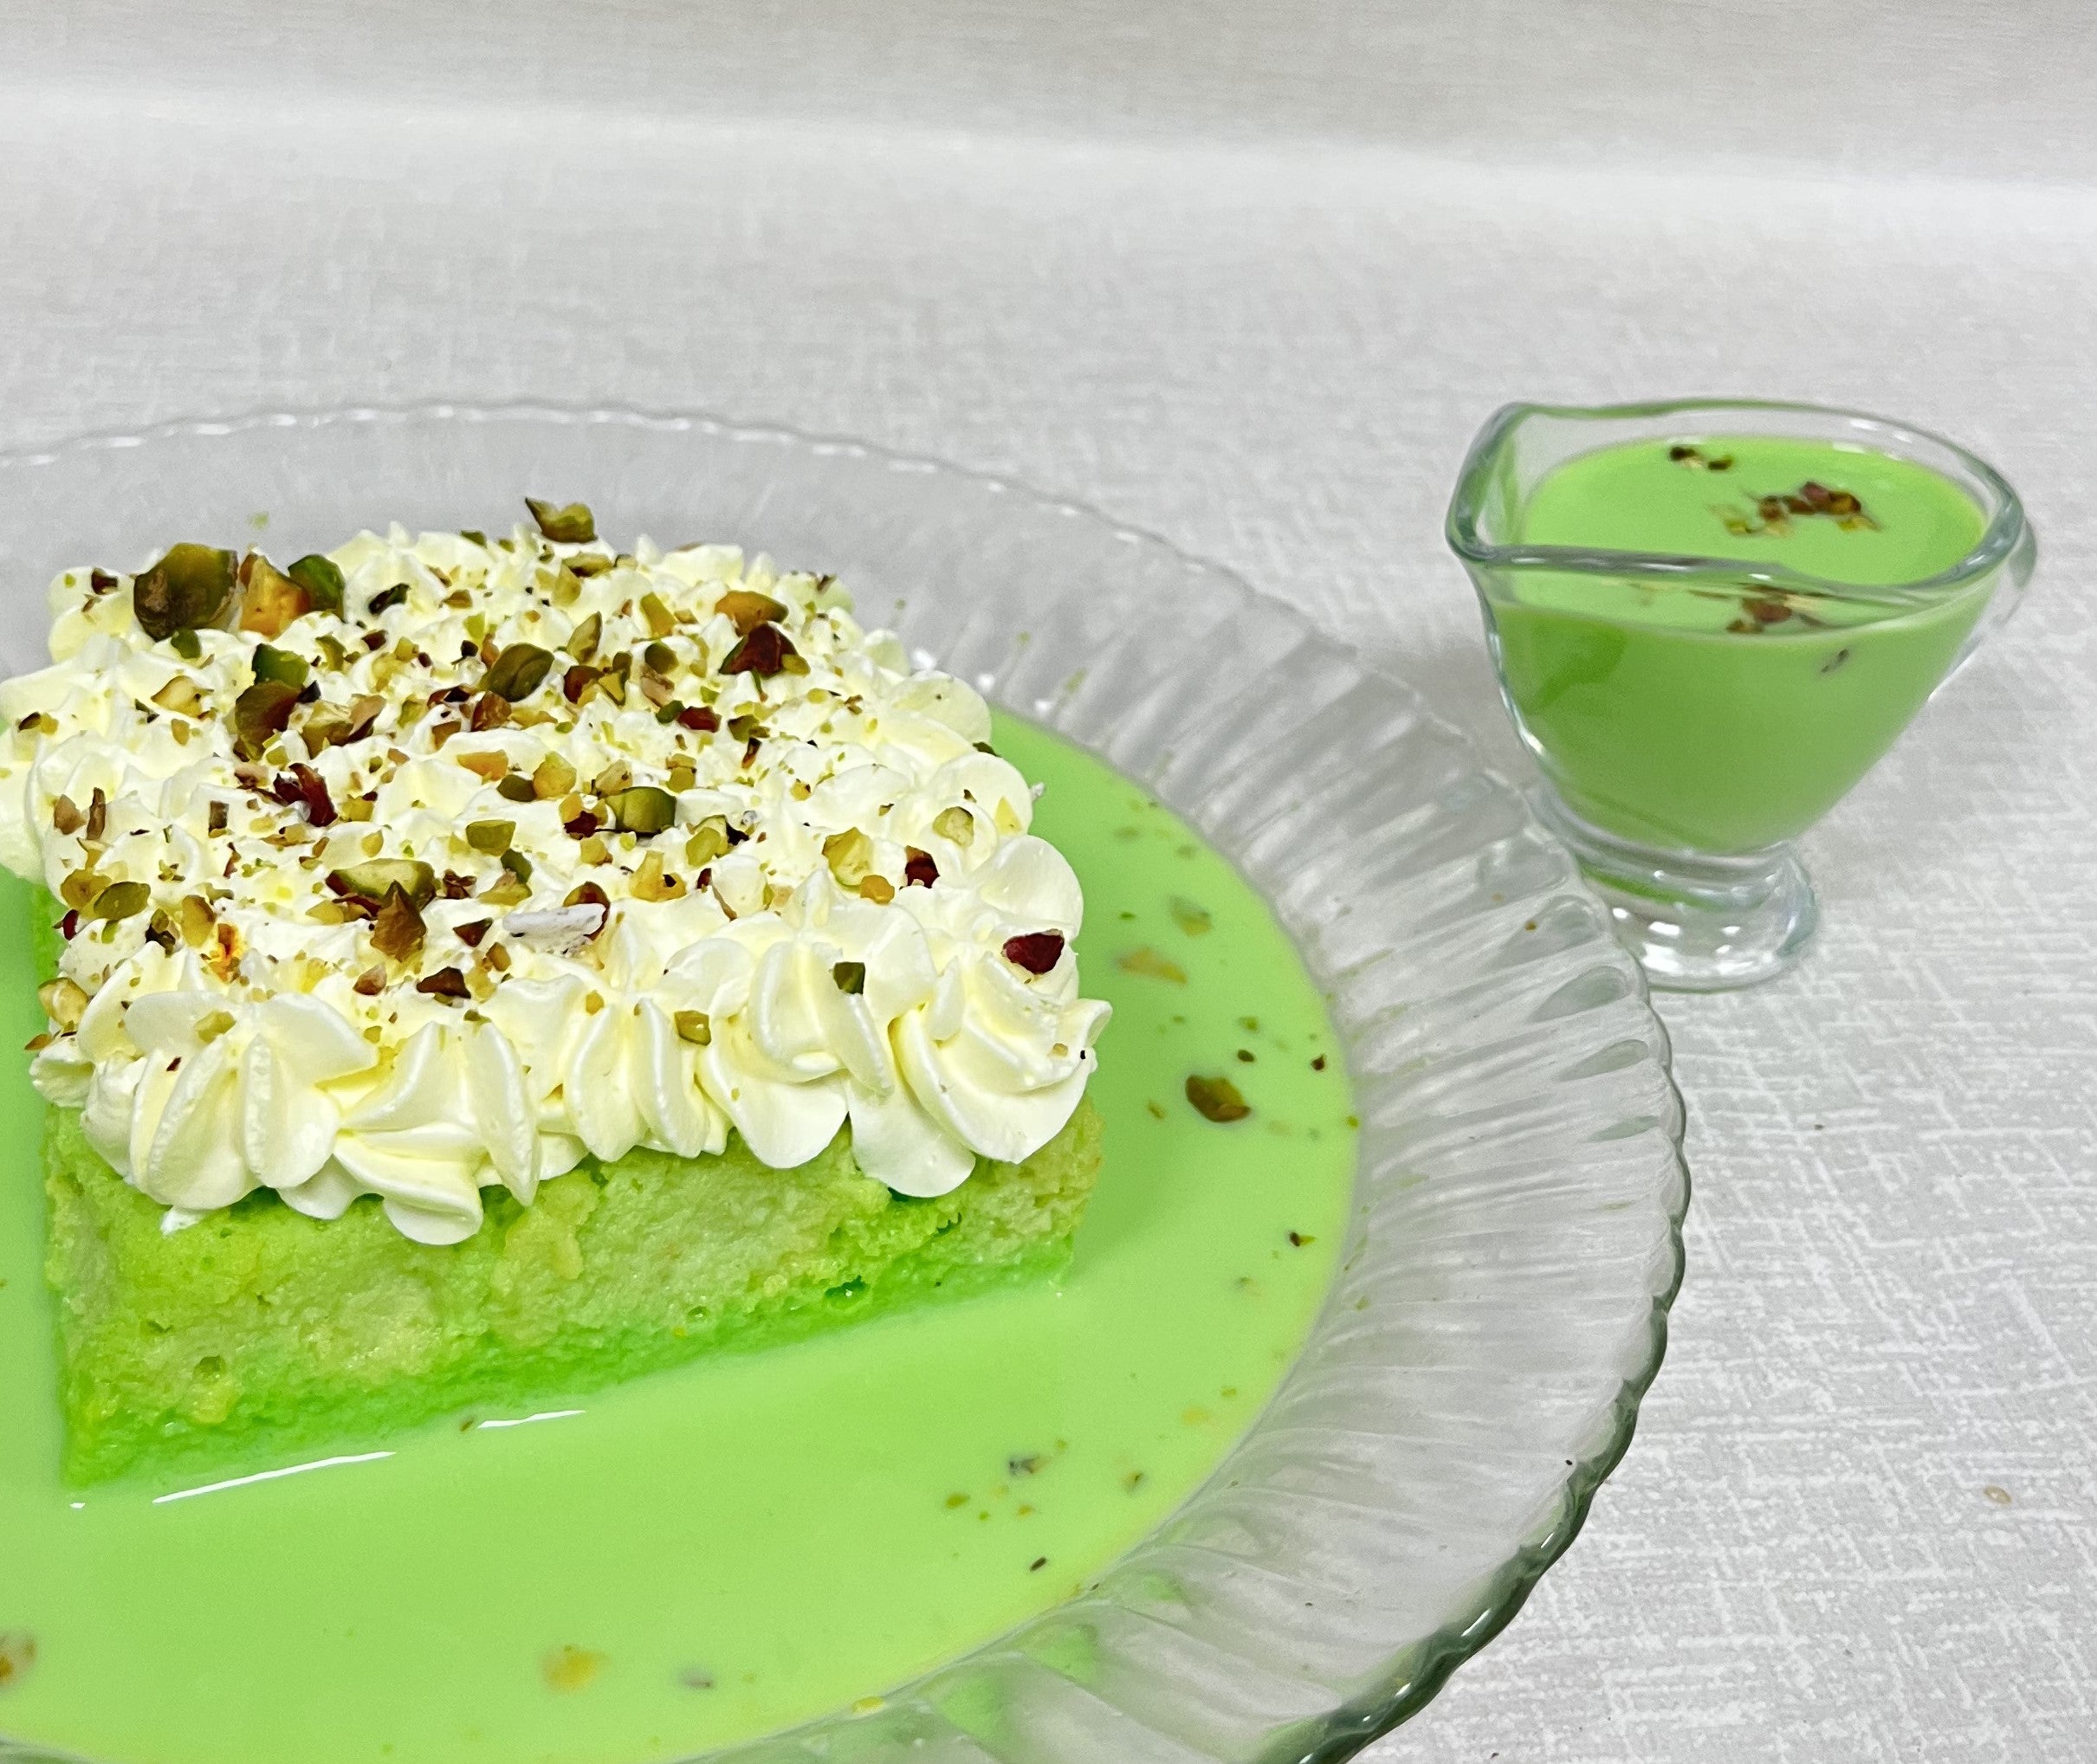 Pistachio Milk Cake from @jolt.london... - Halal Food Therapy | Facebook